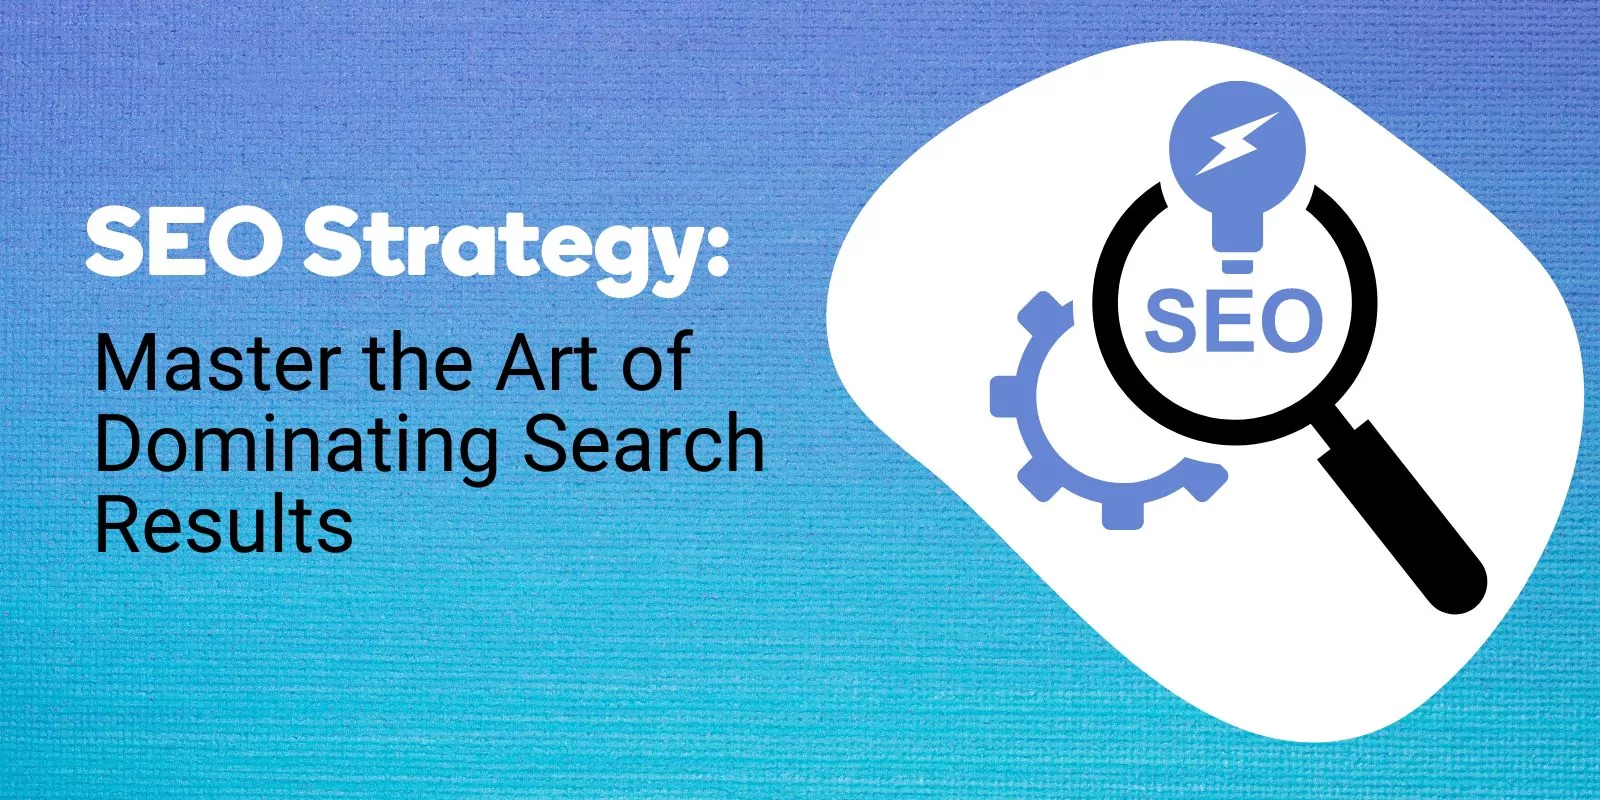 SEO Strategy: Master the Art of Dominating Search Results